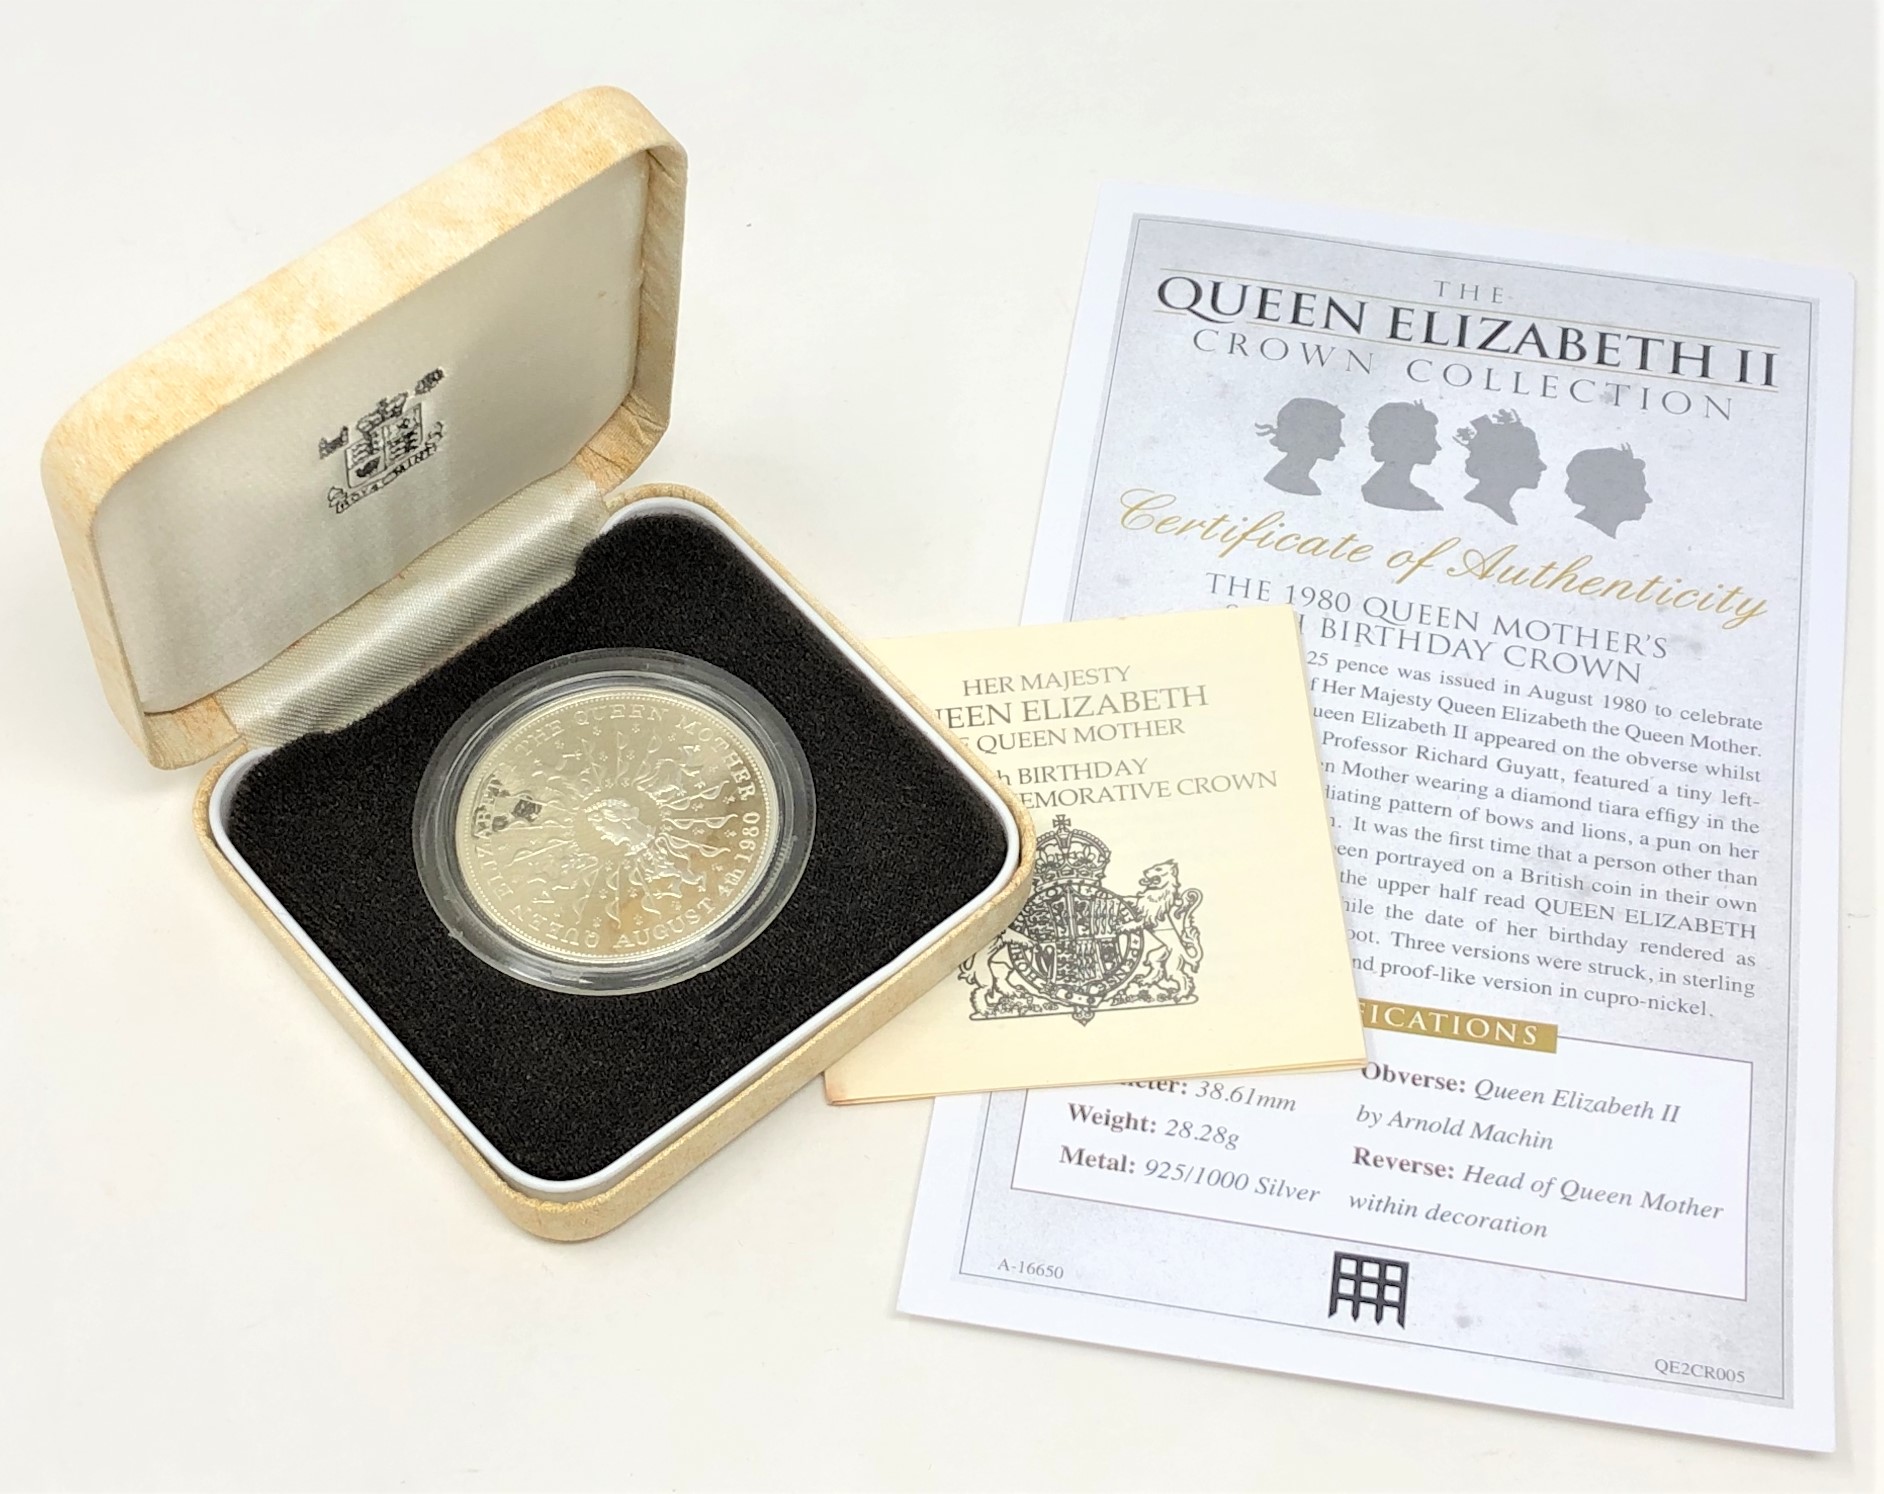 The Royal Mint - The 1980 Queen Mother's 80th Birthday sterling silver crown, 28.28g.